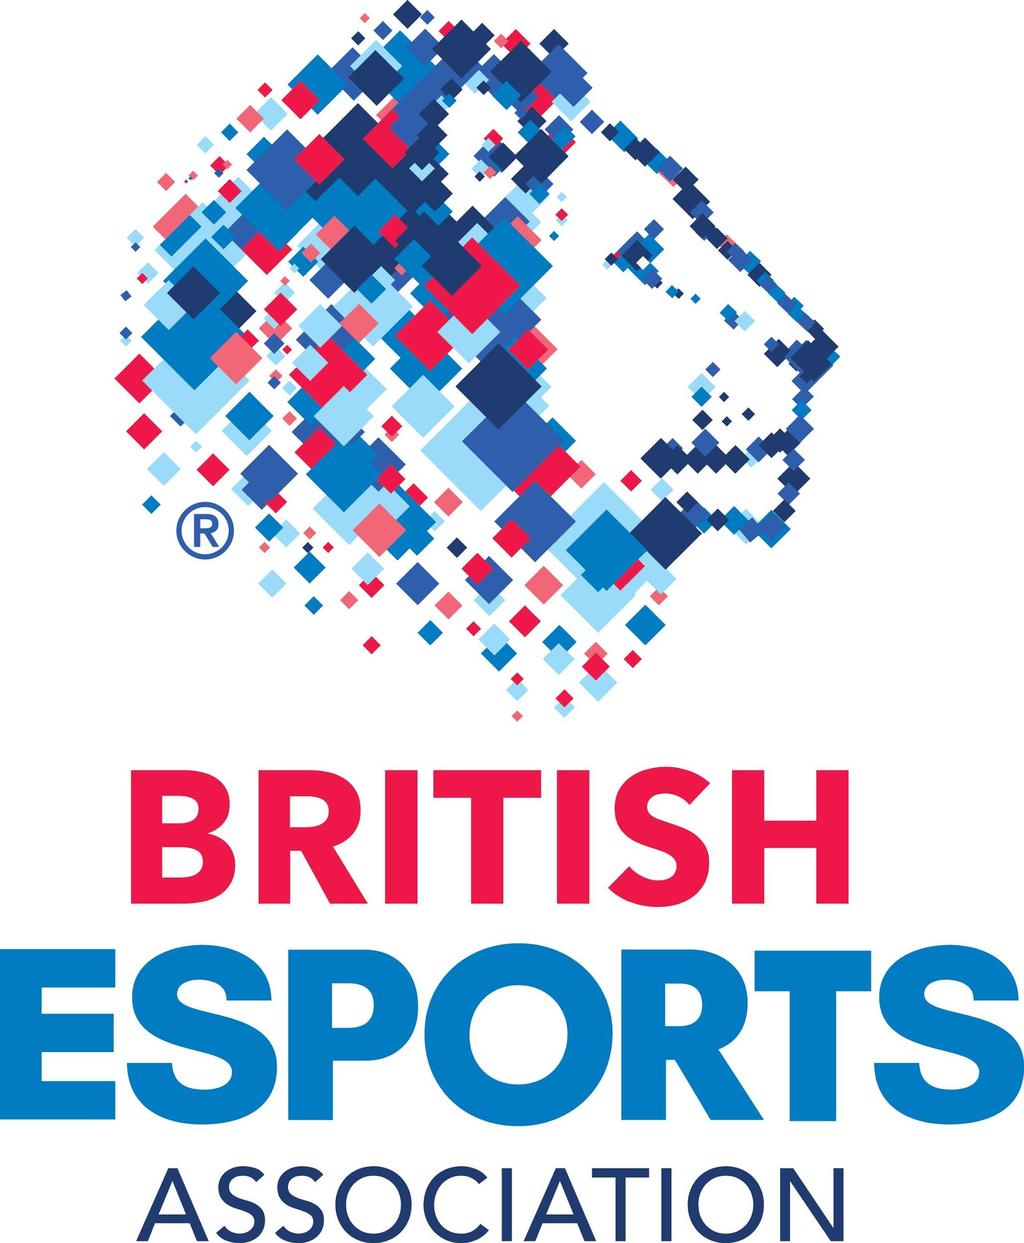 ABOUT US The British Esports Association is a not-for-profit organisation established in 2016 to support and promote esports in the UK.